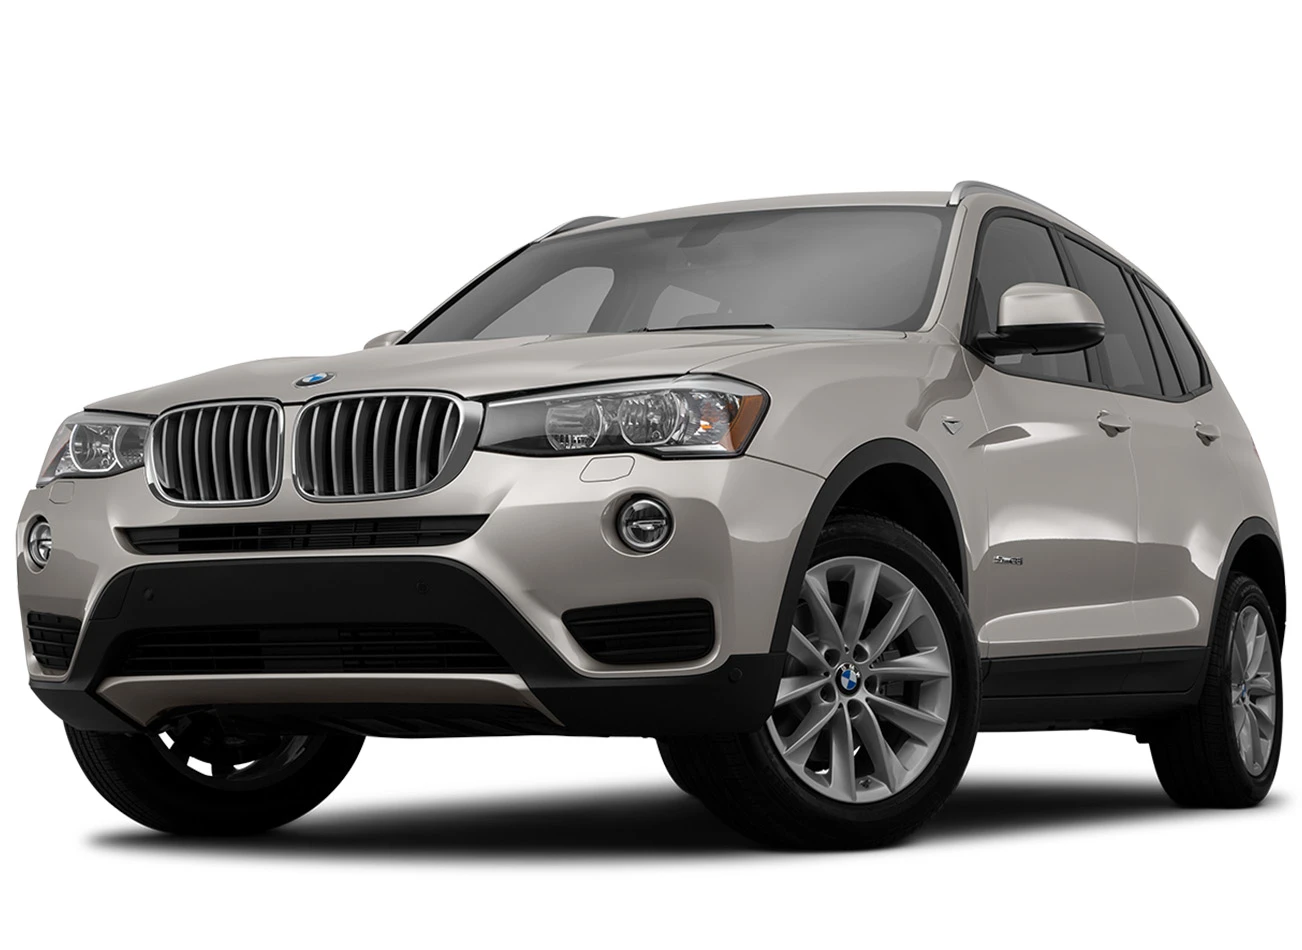 2015 BMW X3 Review: Front exterior view| CarMax